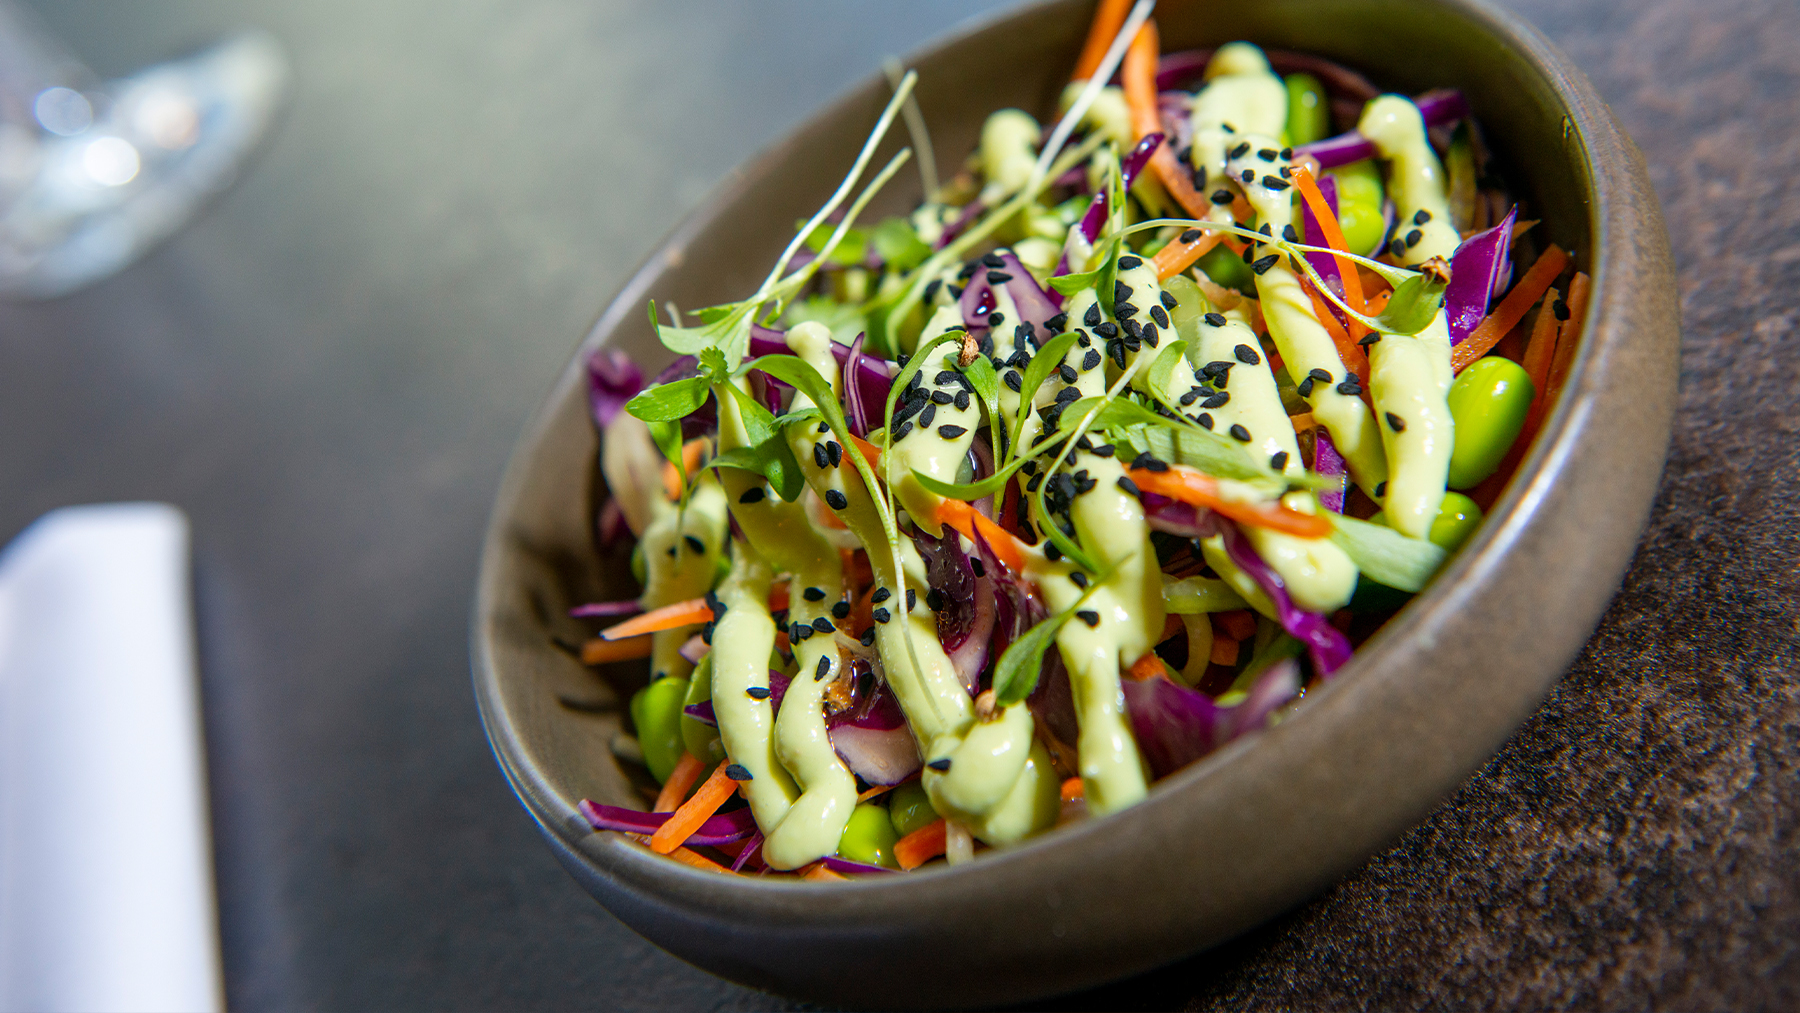 Rainbow salad in a bowl with sesame seeds.